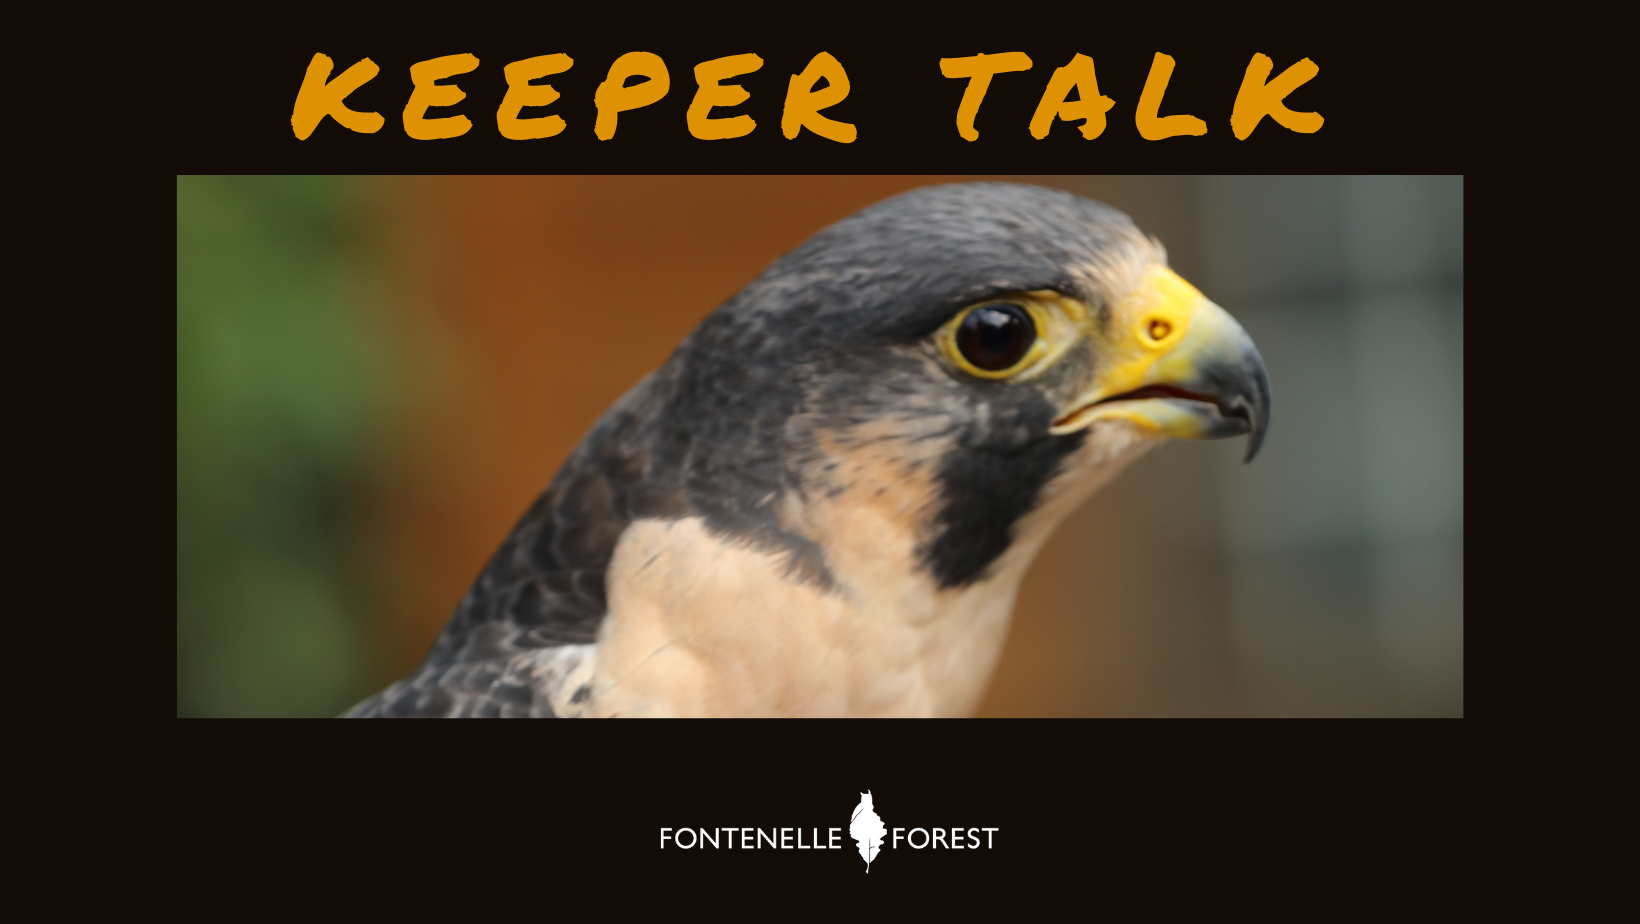 a picture of CHARLOTTE THE PEREGRINE FALCON. It has a black header with the yellow text, "KEEPER TALK". It also had a black footer with a white Fontenelle Forest logo.